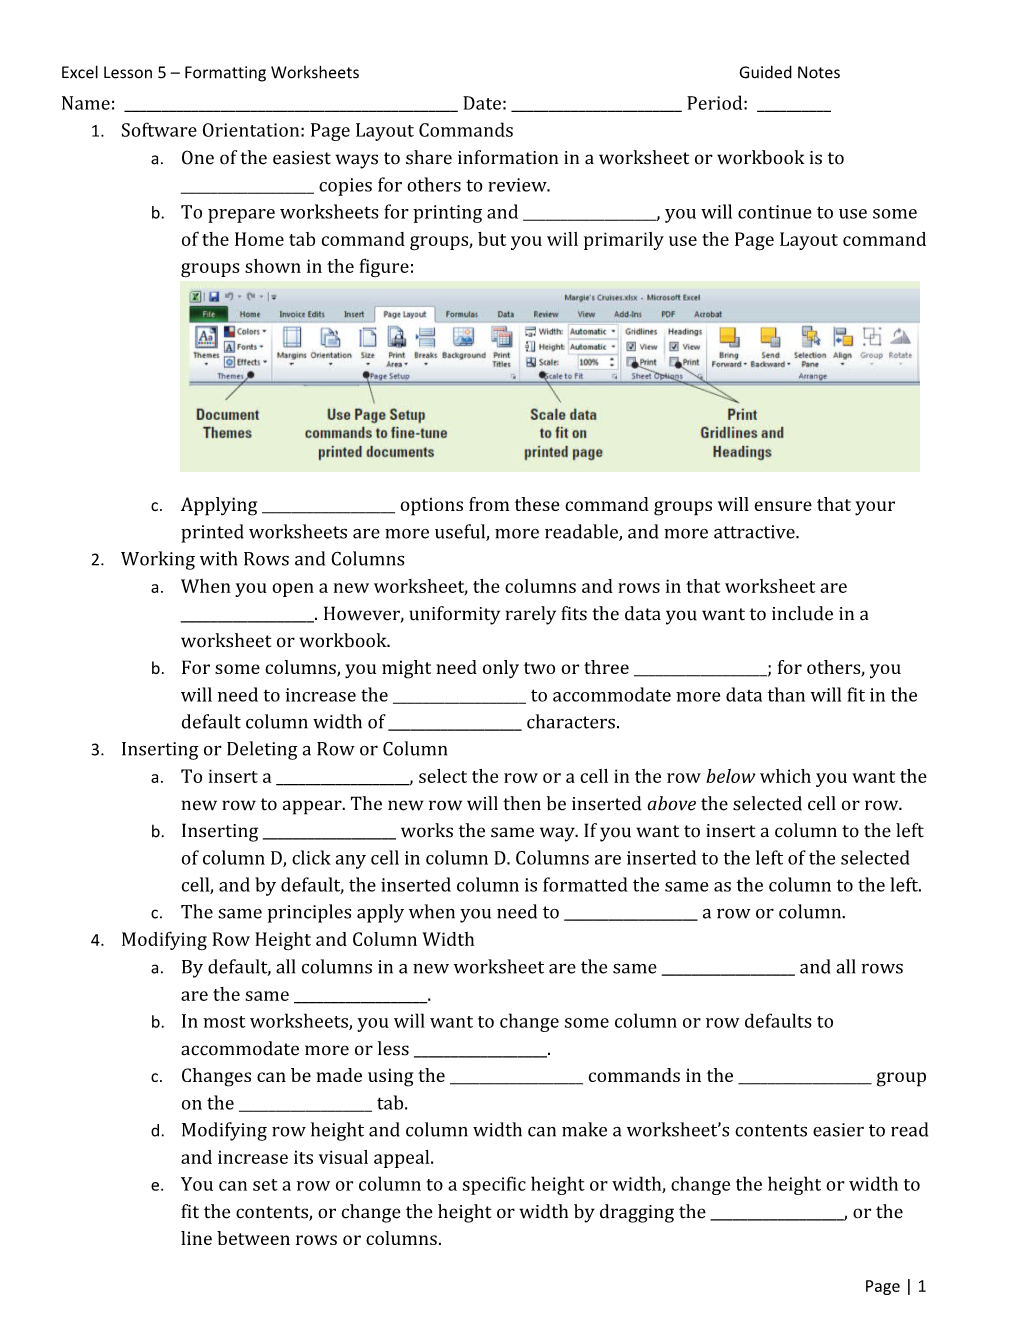 Excel Lesson 5 Formatting Worksheets Guided Notes